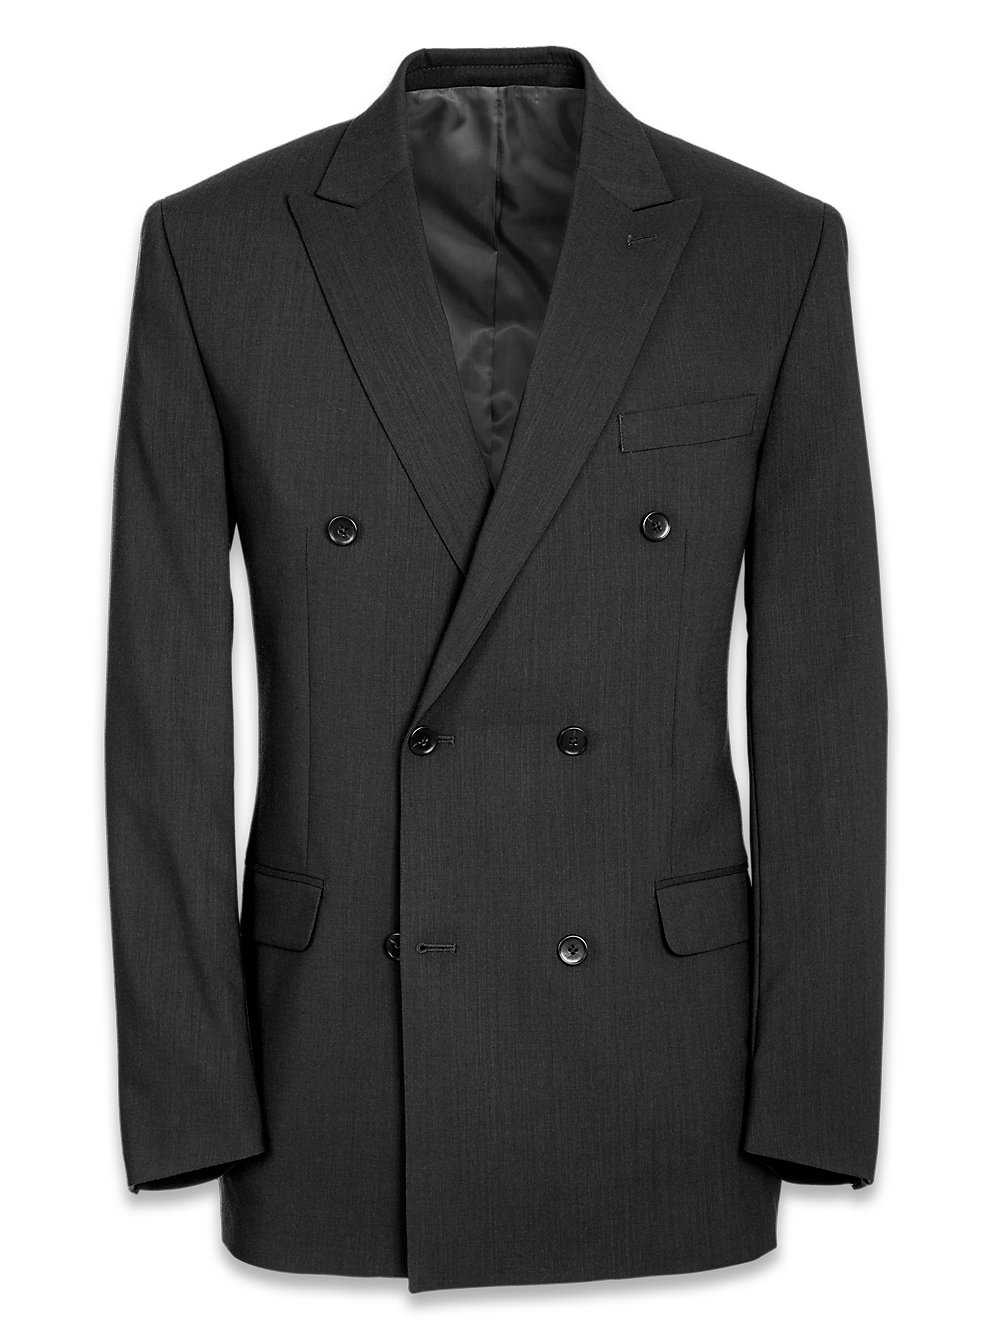 Mens Suits Double Breasted Peak Lapel Tweed Wool Tuxedos Blazer+Pants 2 Pieces++ 